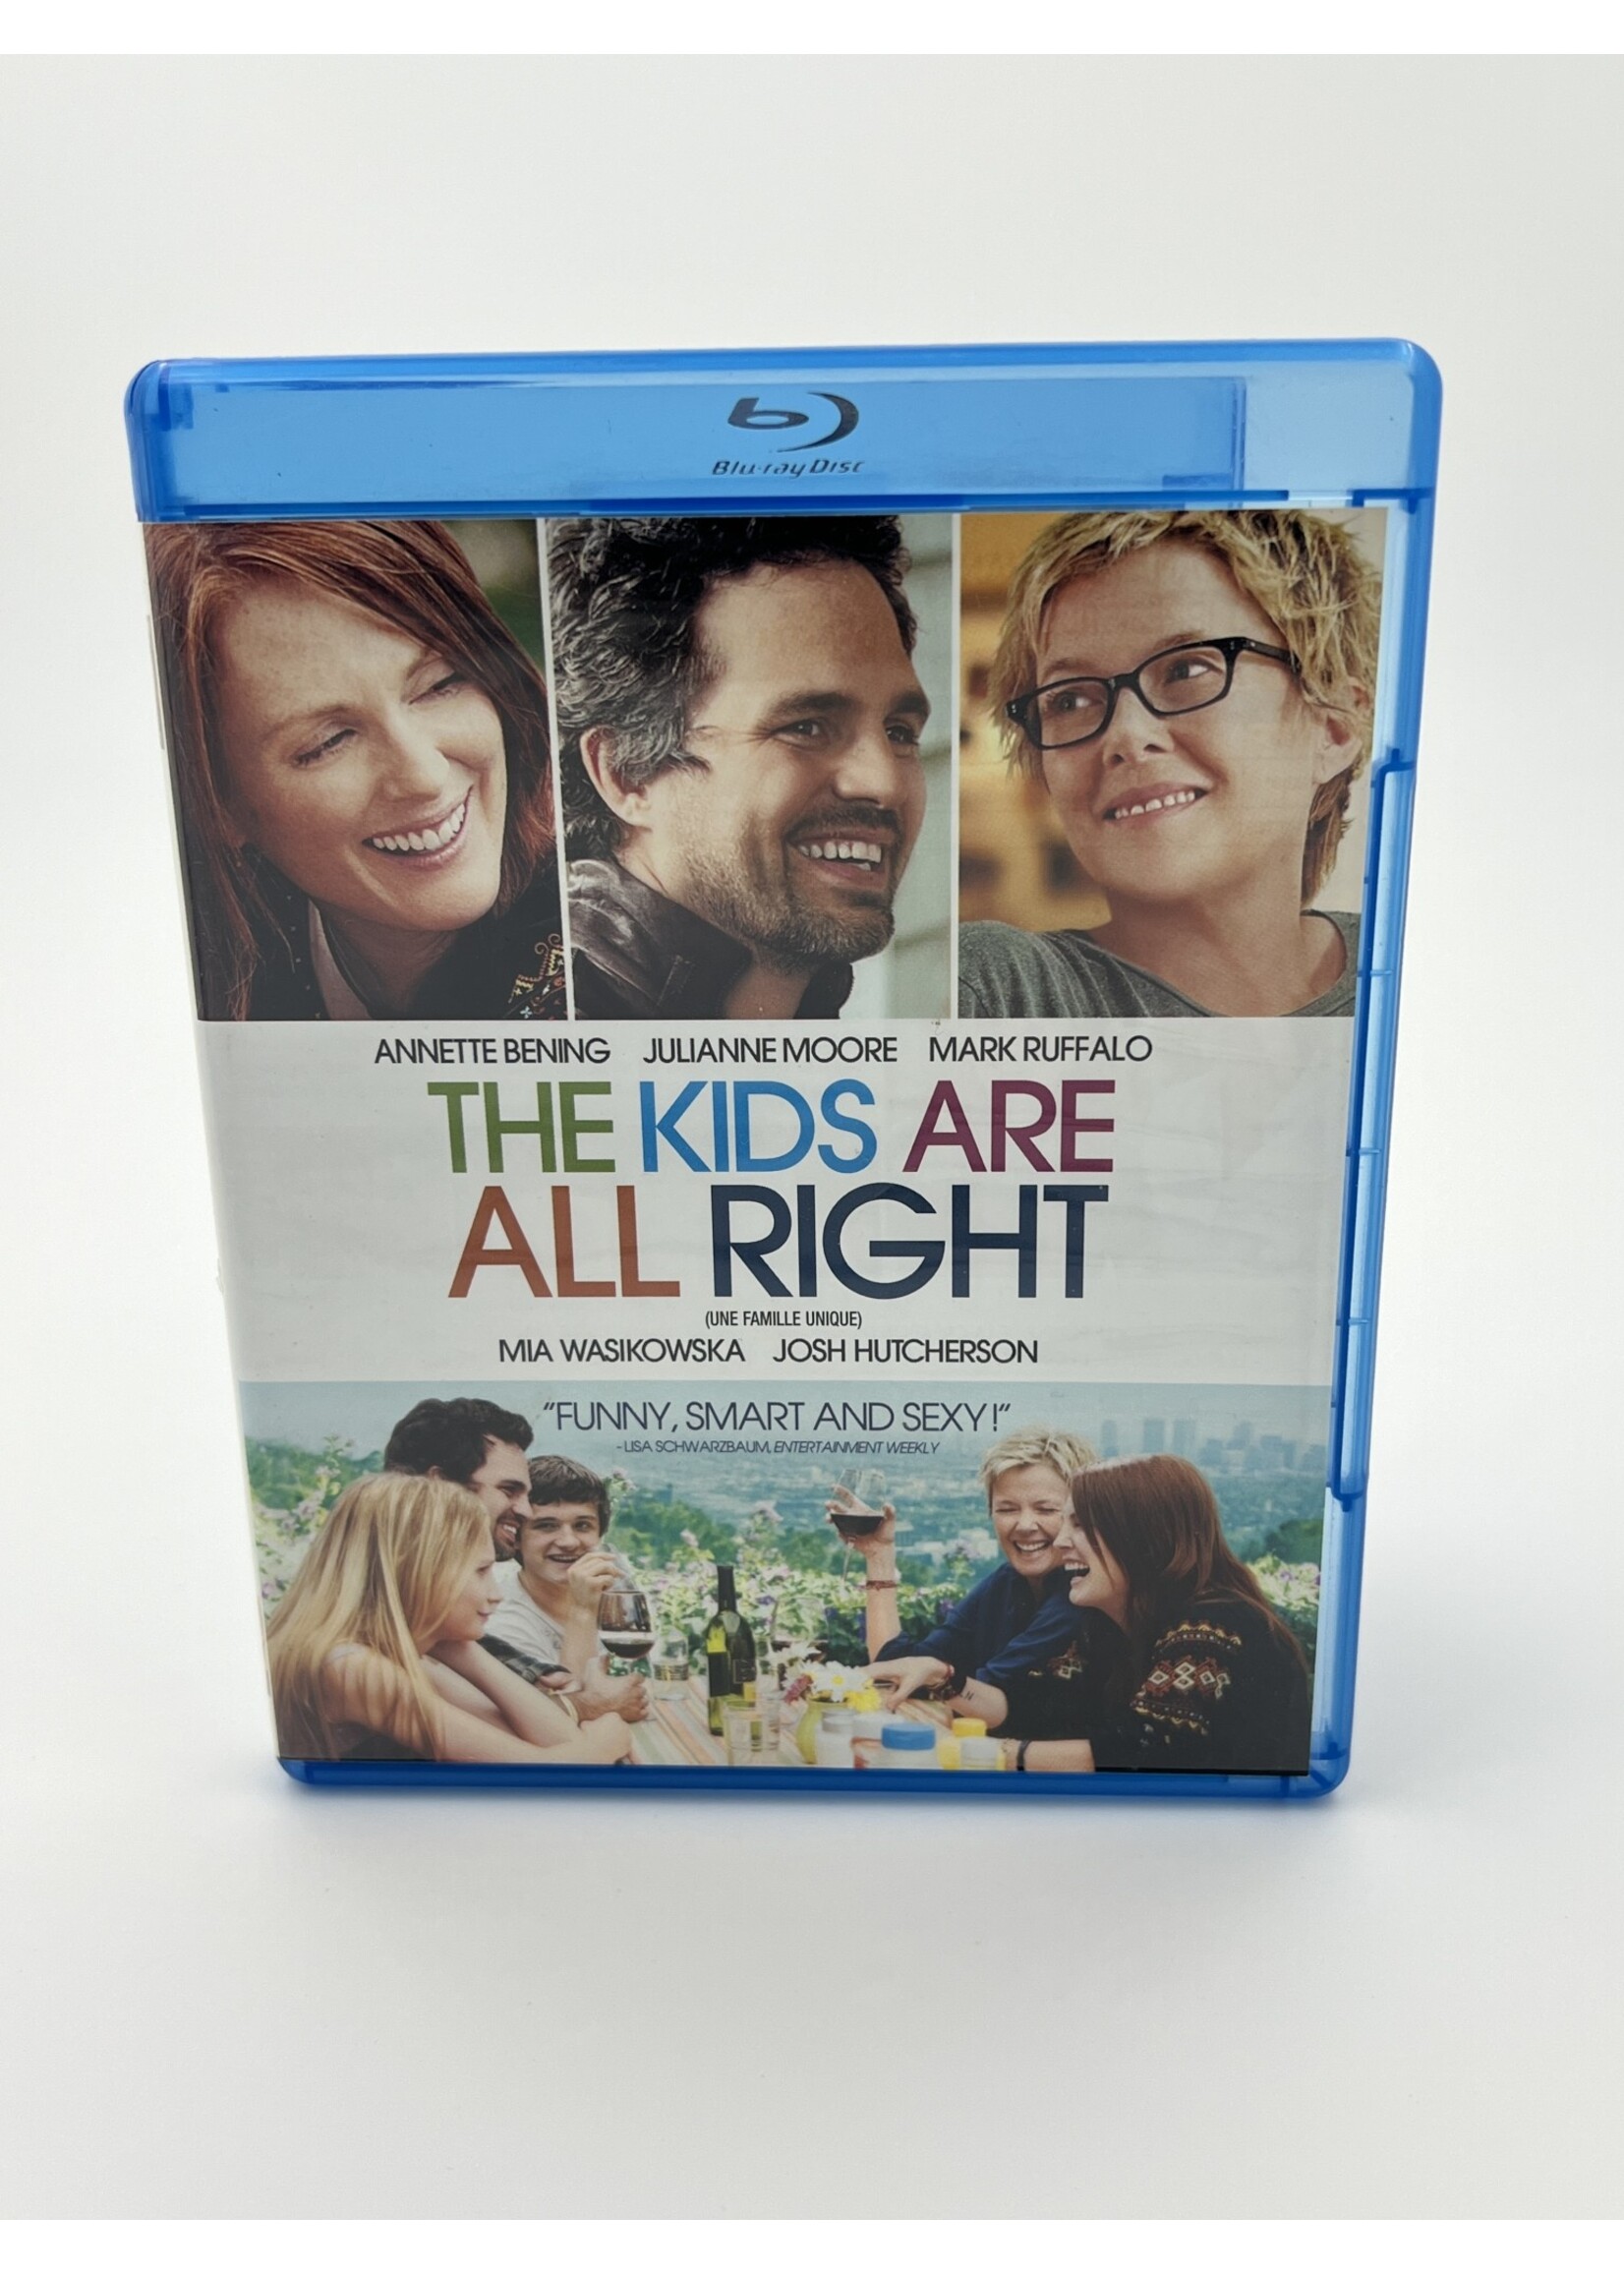 Bluray The Kids Are All Right Bluray